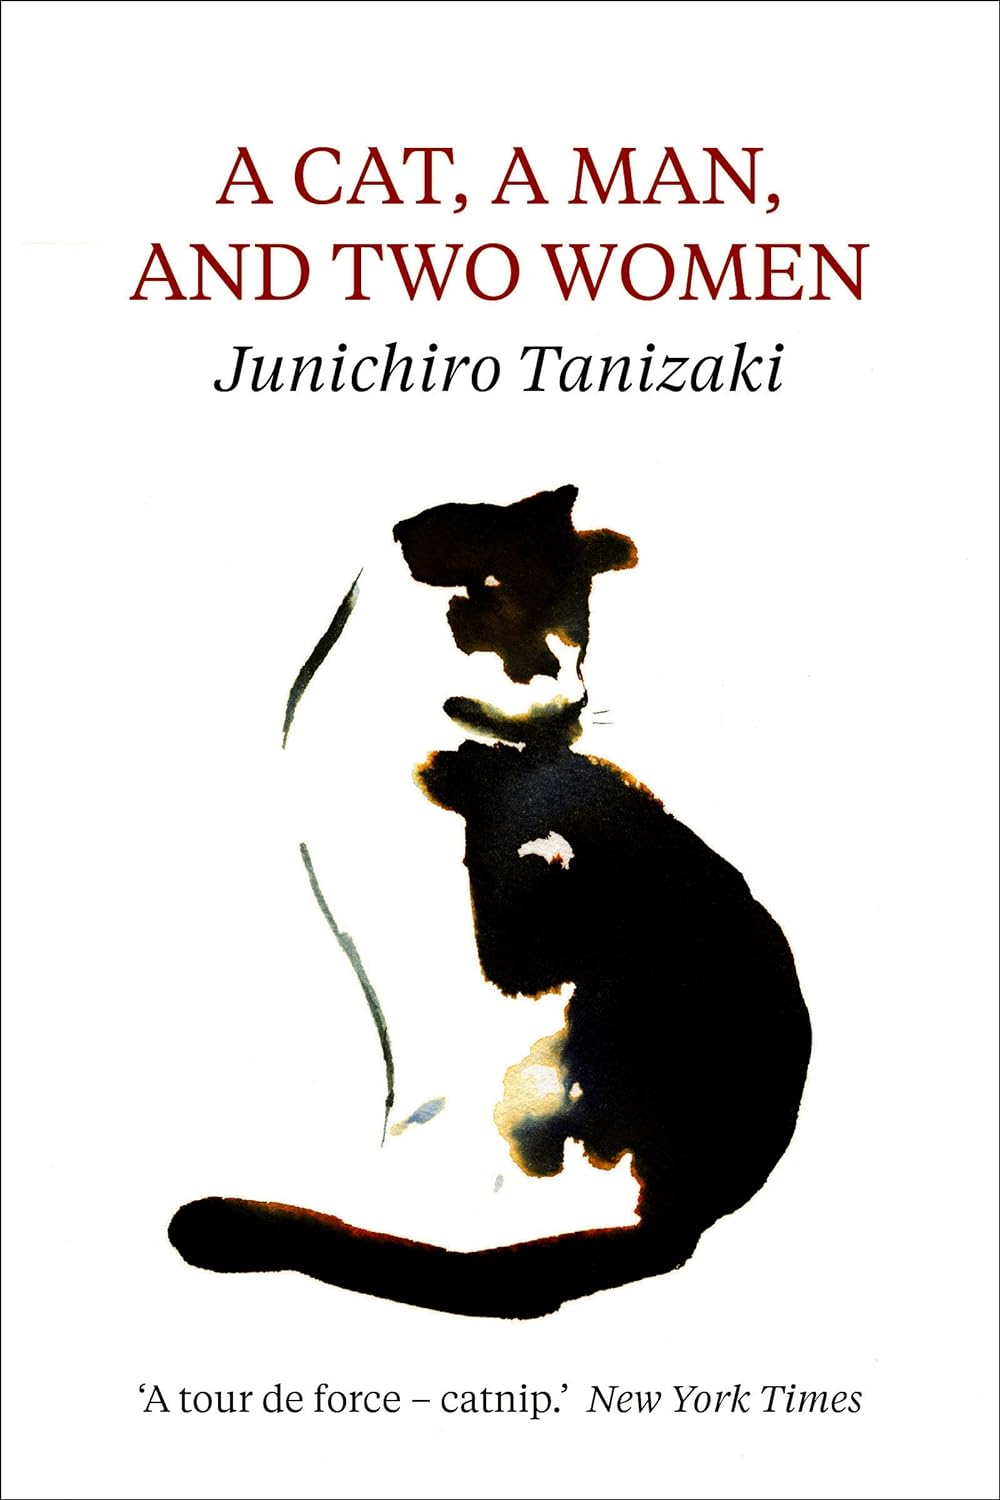 A cat, a man, and two women